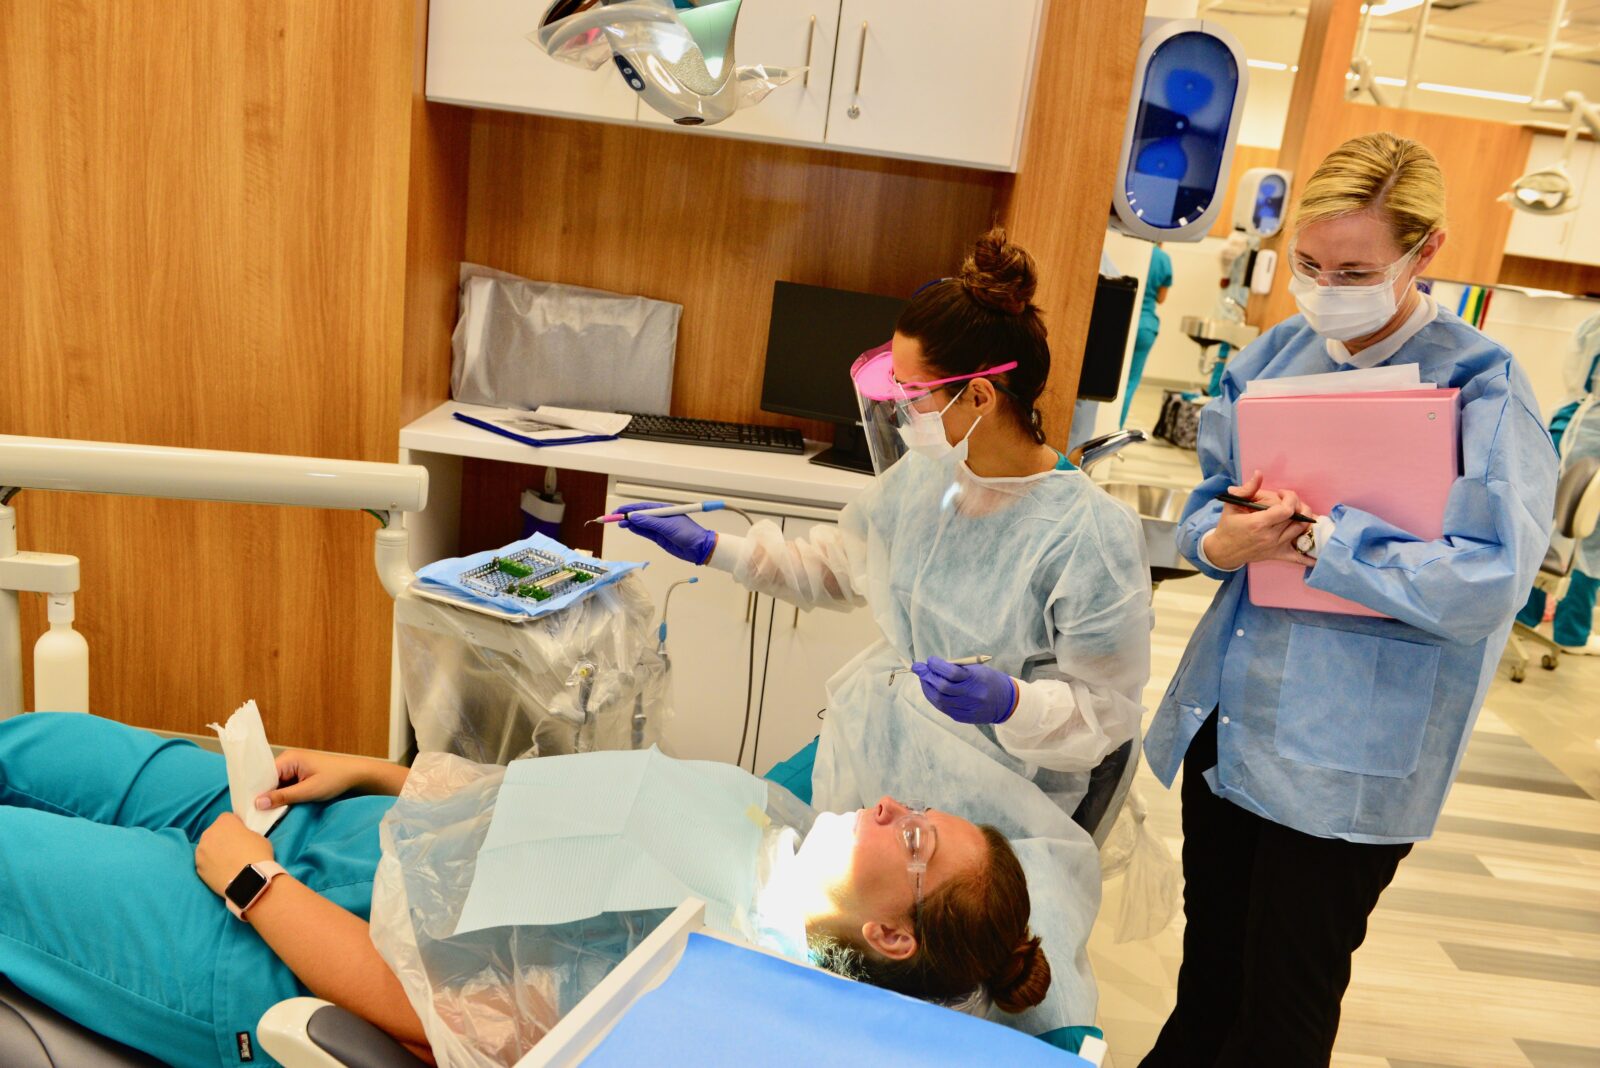 Student and instructor practicing dental services in new STLCC dental clinic